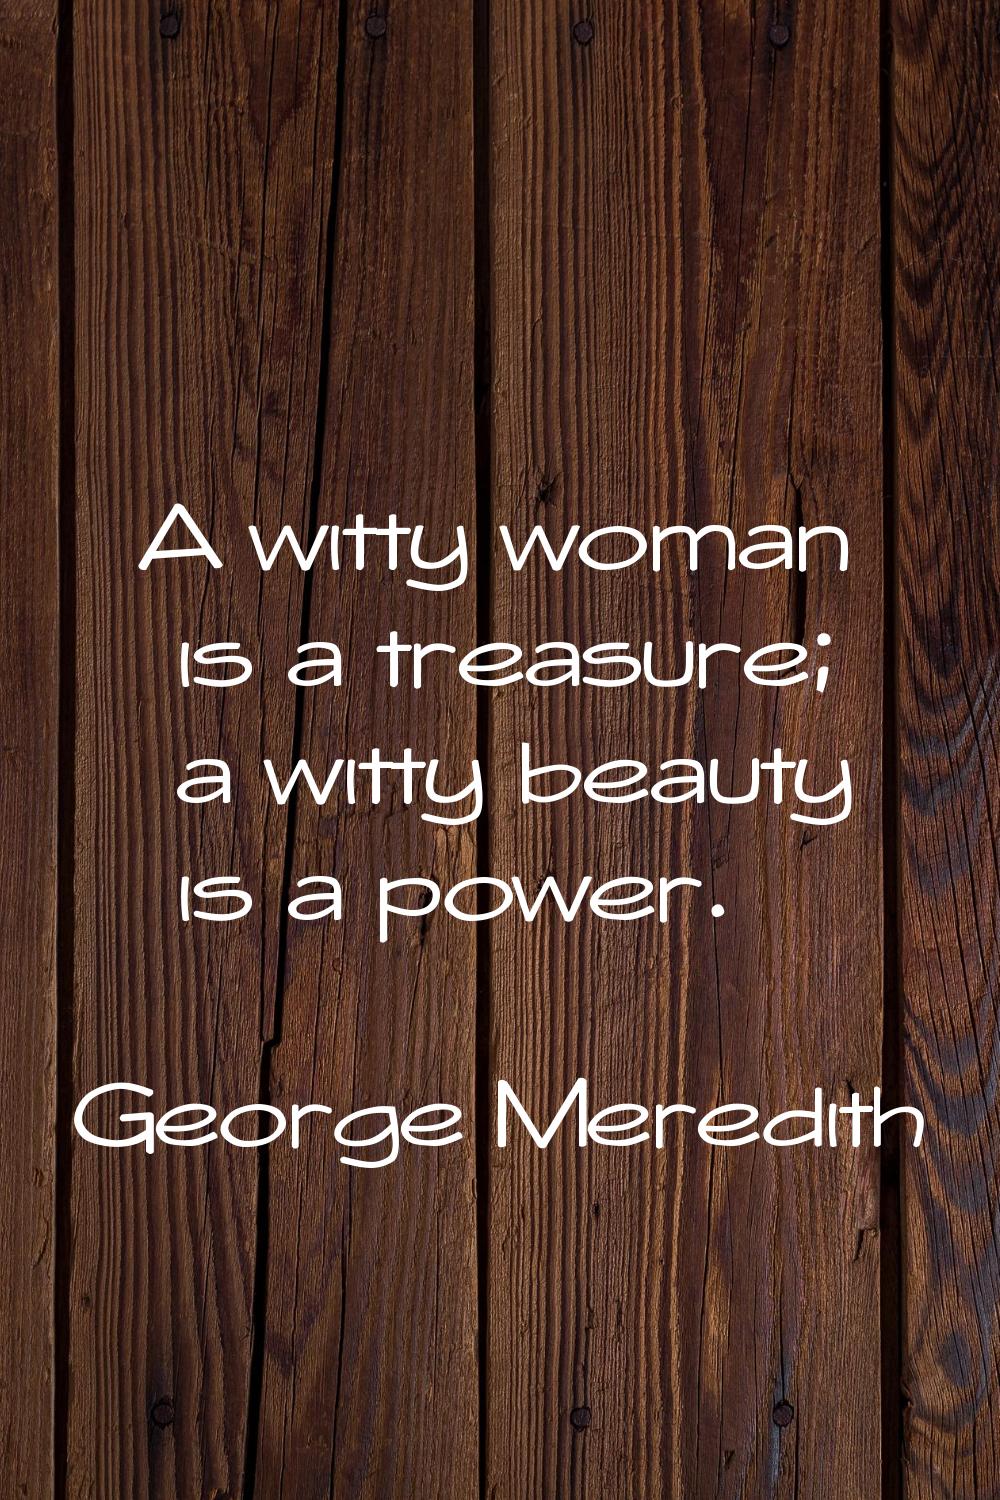 A witty woman is a treasure; a witty beauty is a power.